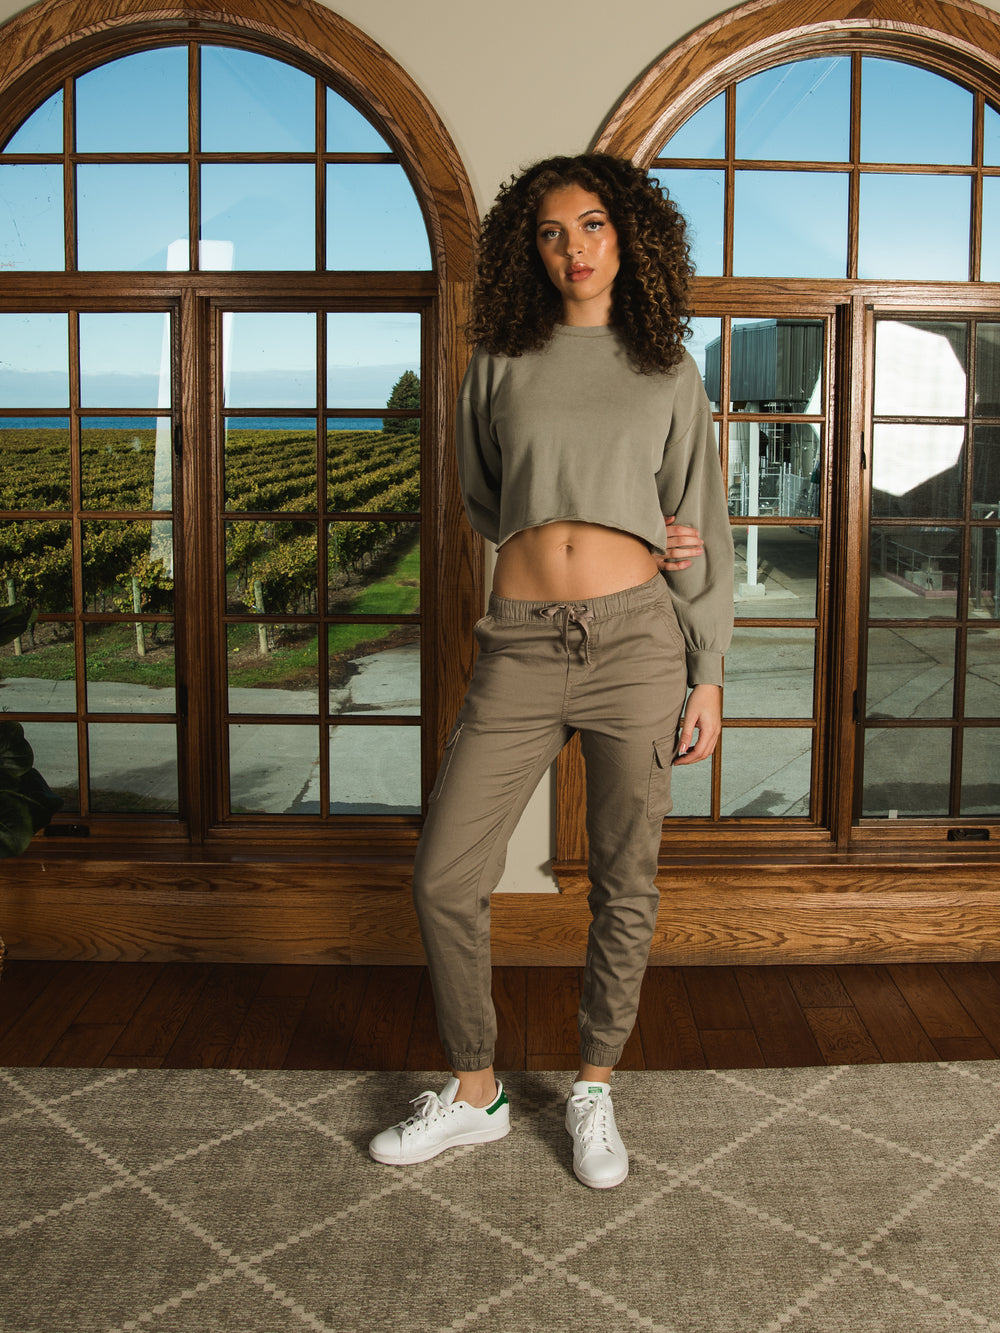 HARLOW GISELLE CROPPED CREW - DÉSTOCKAGE